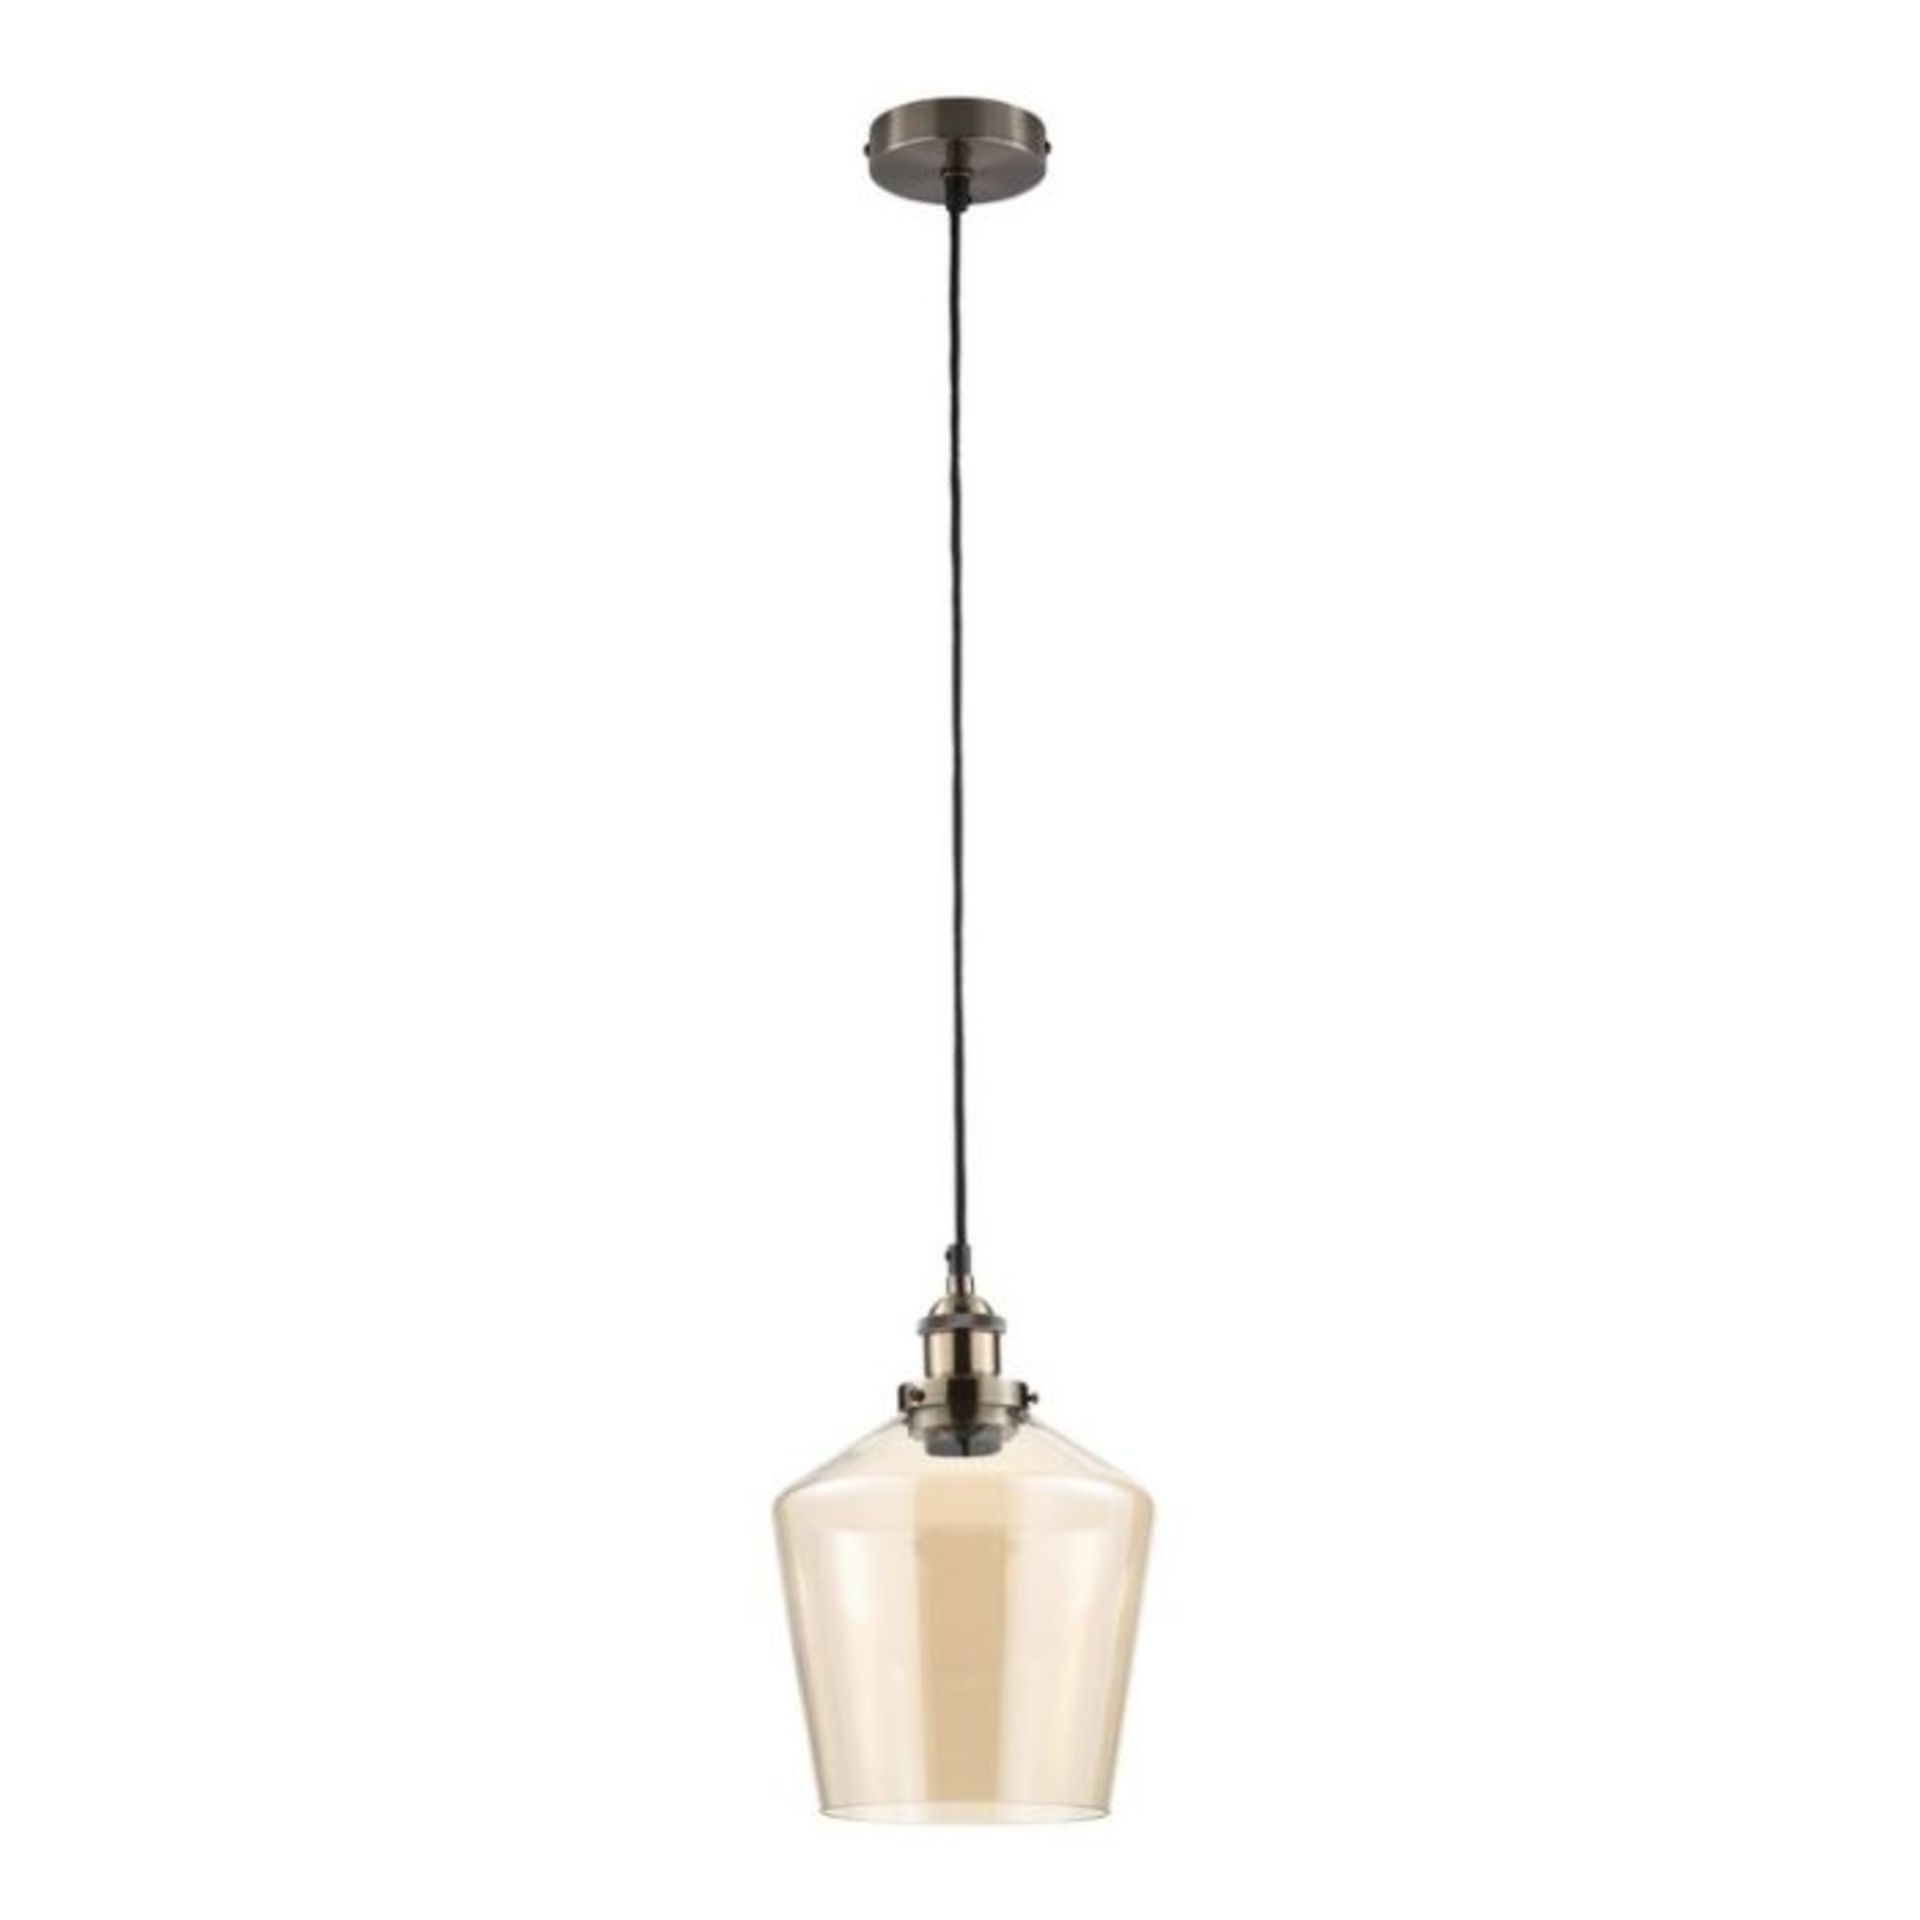 Marlow Home Co., Aileen 1-Light Dome Pendant (GLASS PENDANT) - RRP £61.99 ( PACH7471 - 17267/10)